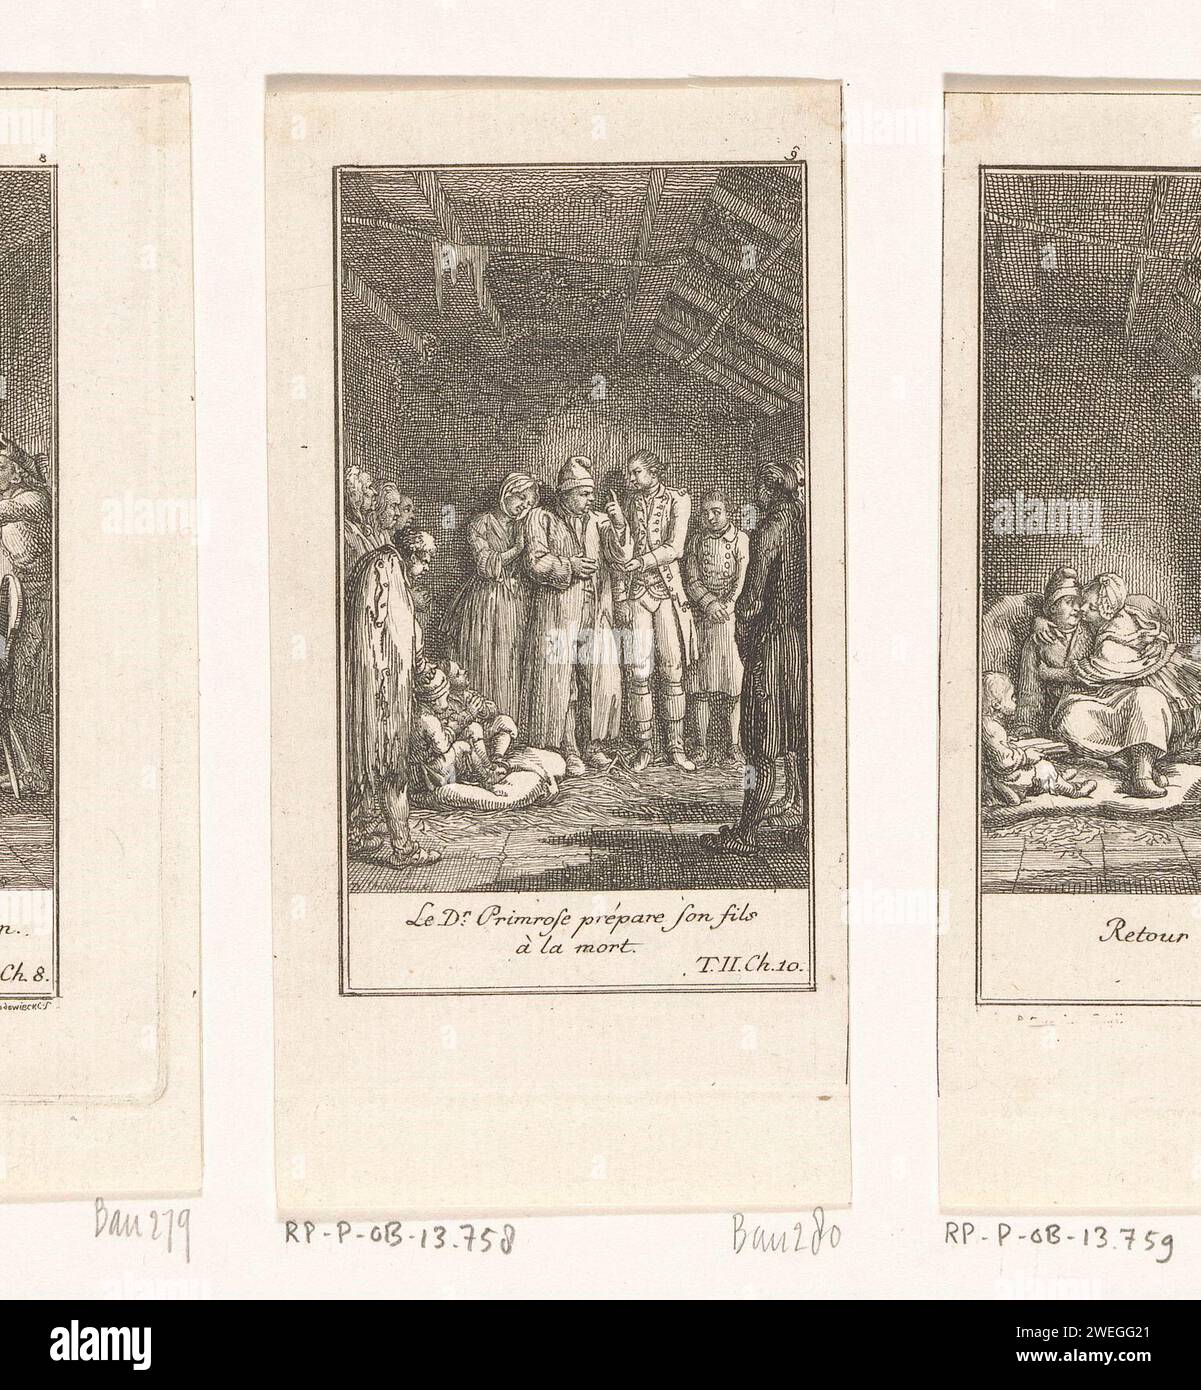 Charles Primrose prepares his son for the death, Daniel Nikolaus Chodowiecki, 1776 print George ended up in jail with his father because he was seriously injured one of the men of Thornhill. His father tries to prepare him for the death penalty that may hang above his head. Numbered at the top right: 9.  paper etching (GOLDSMITH, The Vicar of Wakefield) specific works of literature (with AUTHOR, title). prison, jail Stock Photo